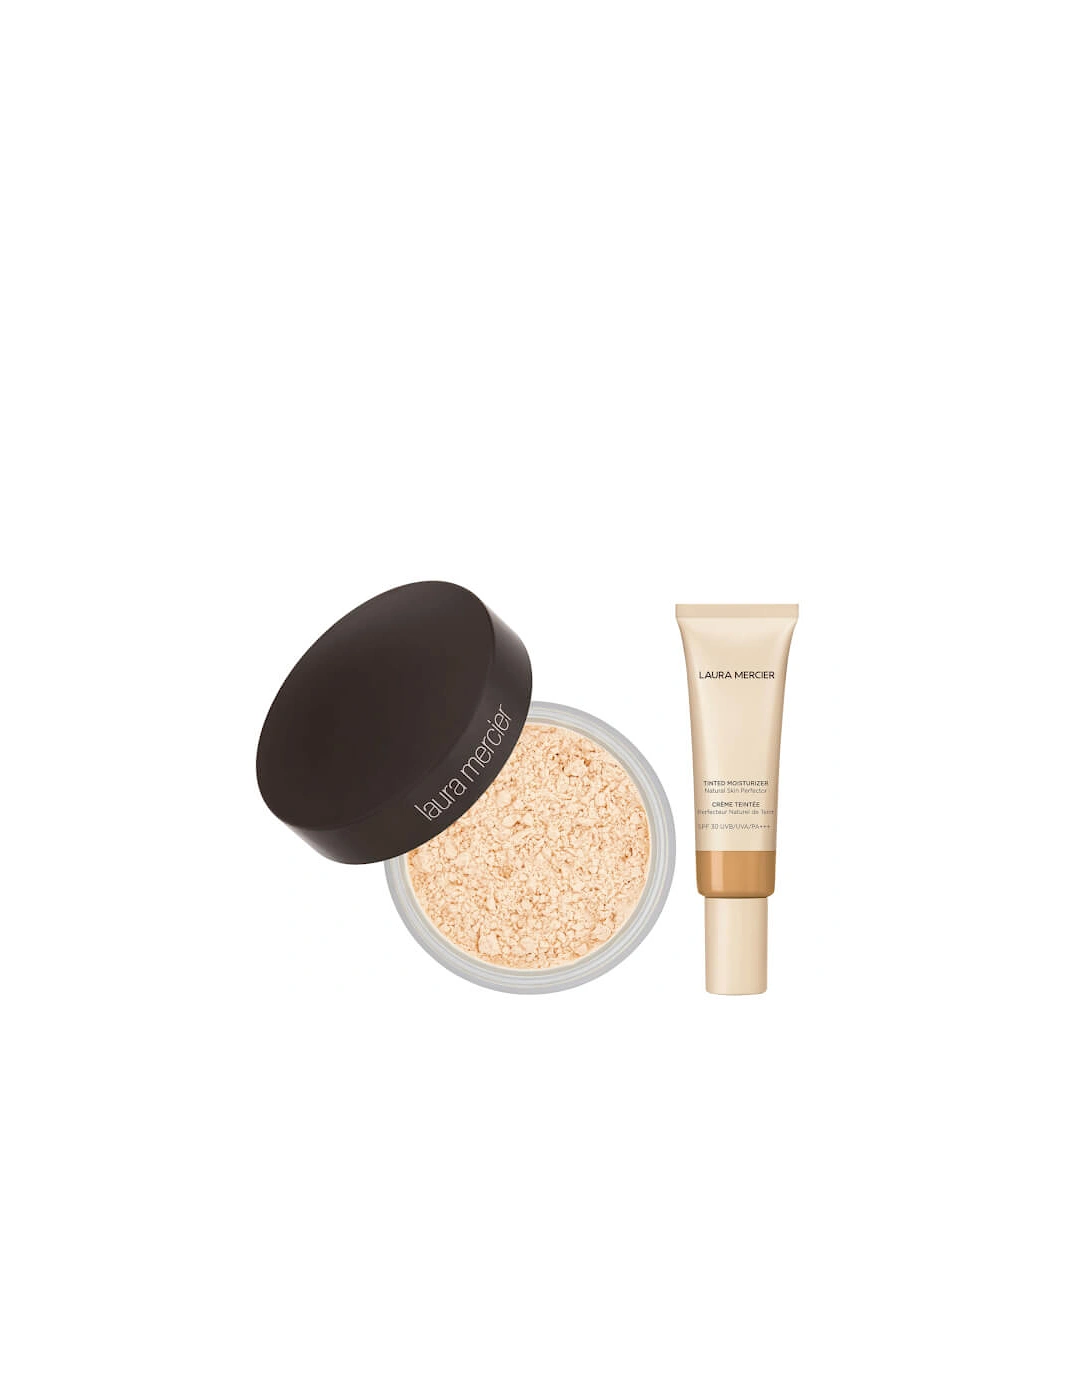 Translucent Loose Setting Powder and Tinted Moisturiser Duo - Tawny, 2 of 1